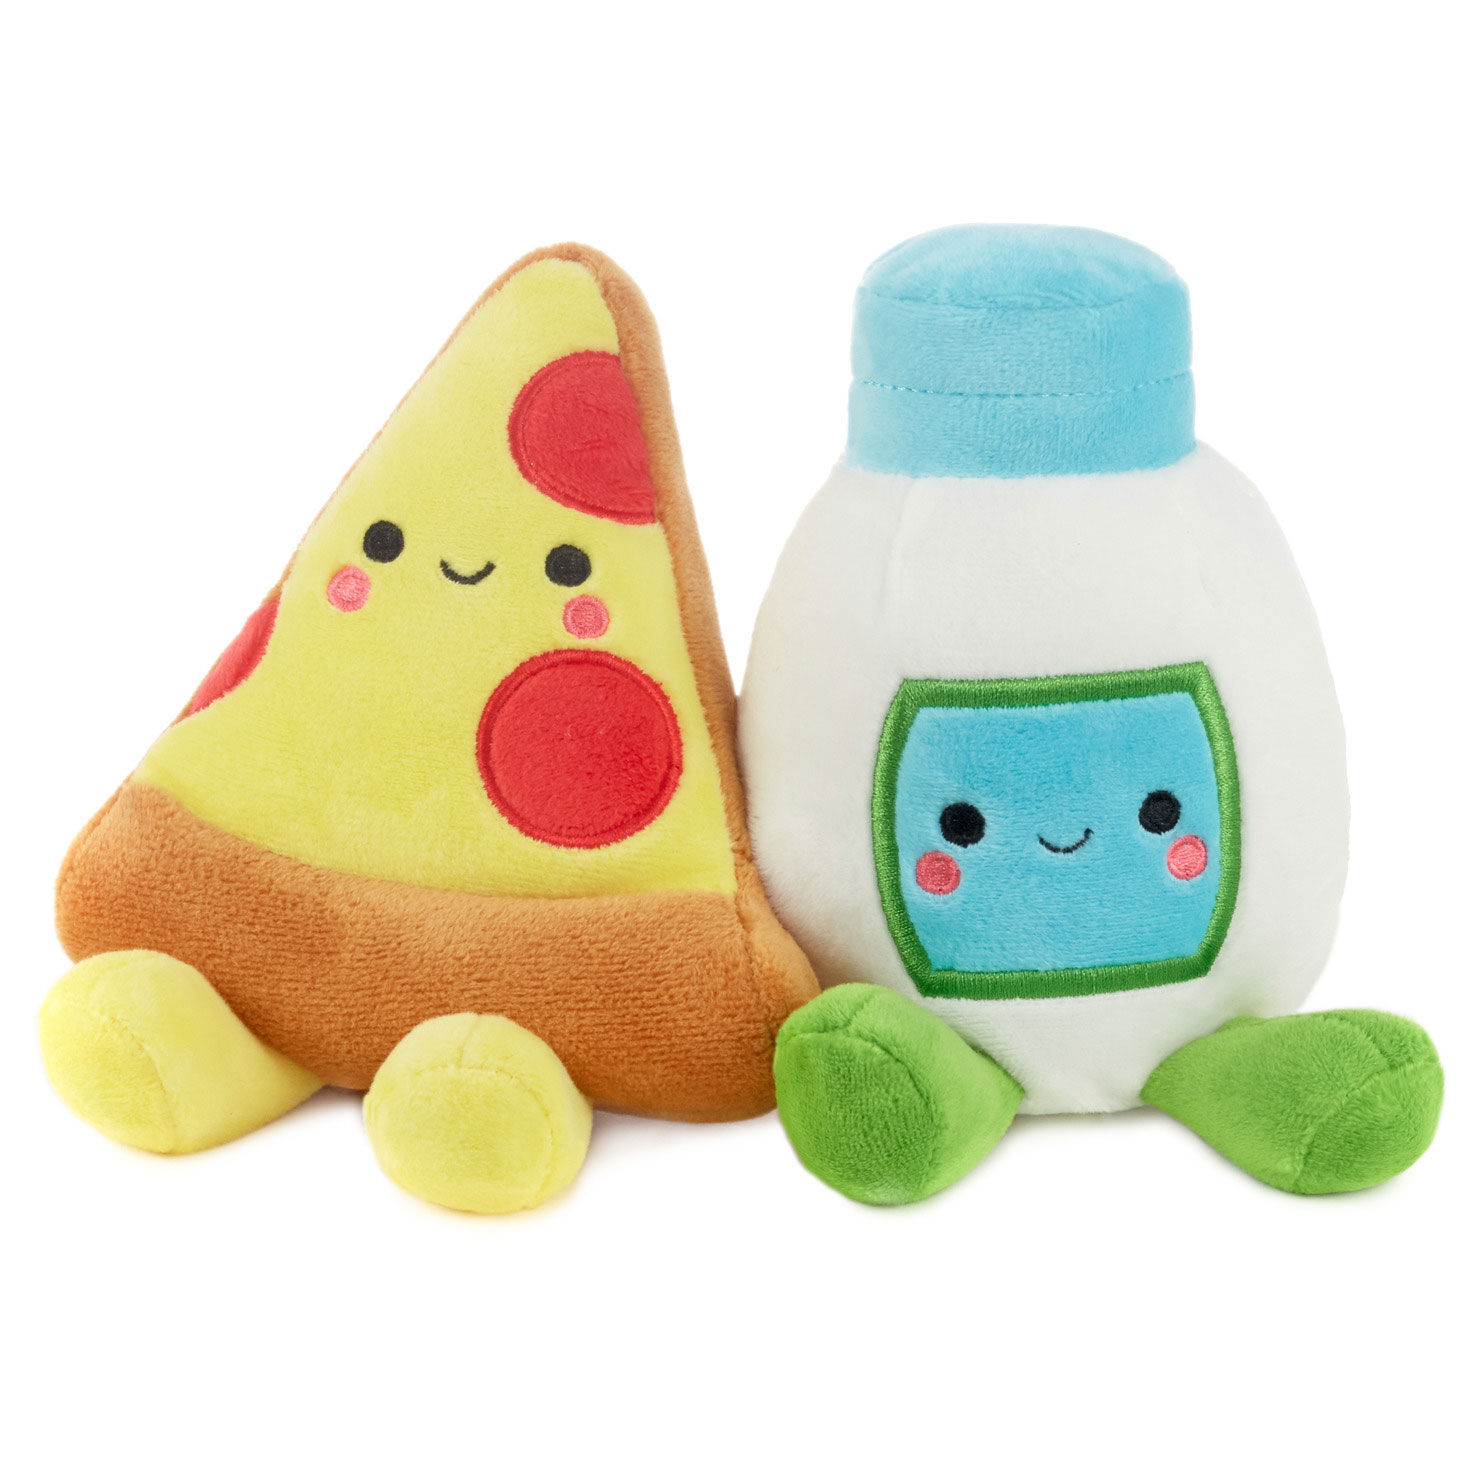 Better Together Pizza and Ranch Magnetic Plush Pair, 5.5" for only USD 16.99 | Hallmark